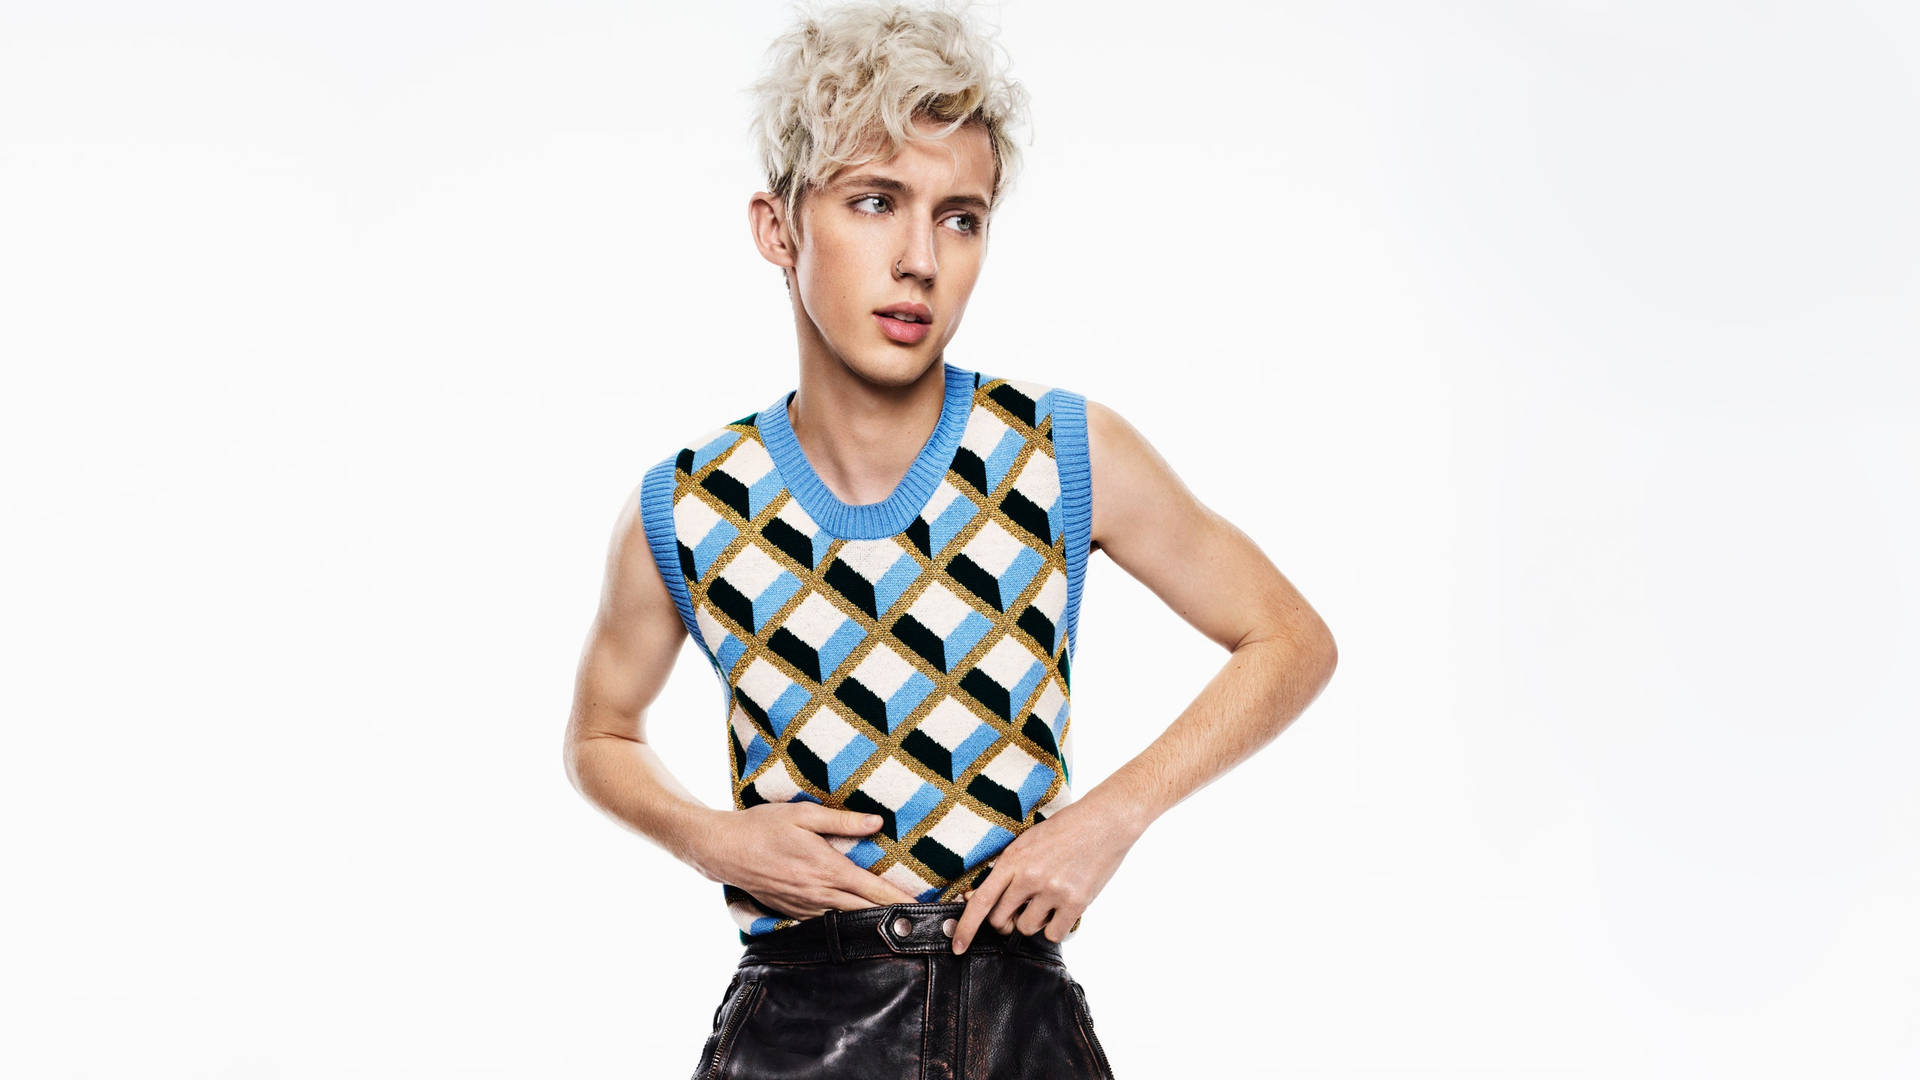 Troye Sivan sporting a stylish blue retro outfit. Wallpaper